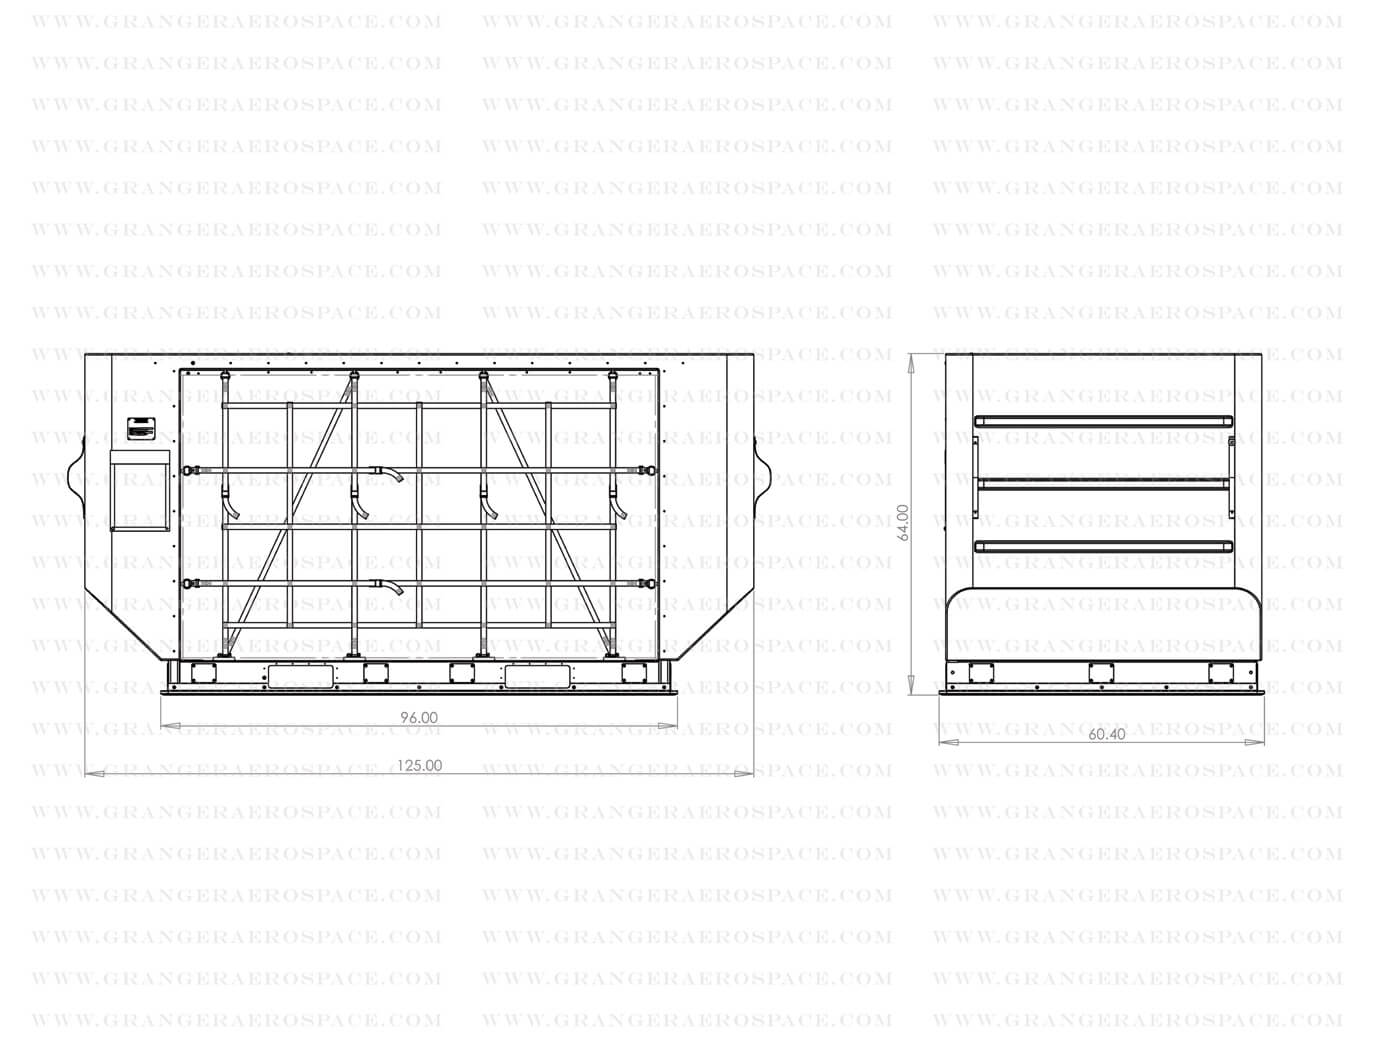 LD 2 Dimensions, LD 2 Air Cargo Container Dimensions, DPN dimensions